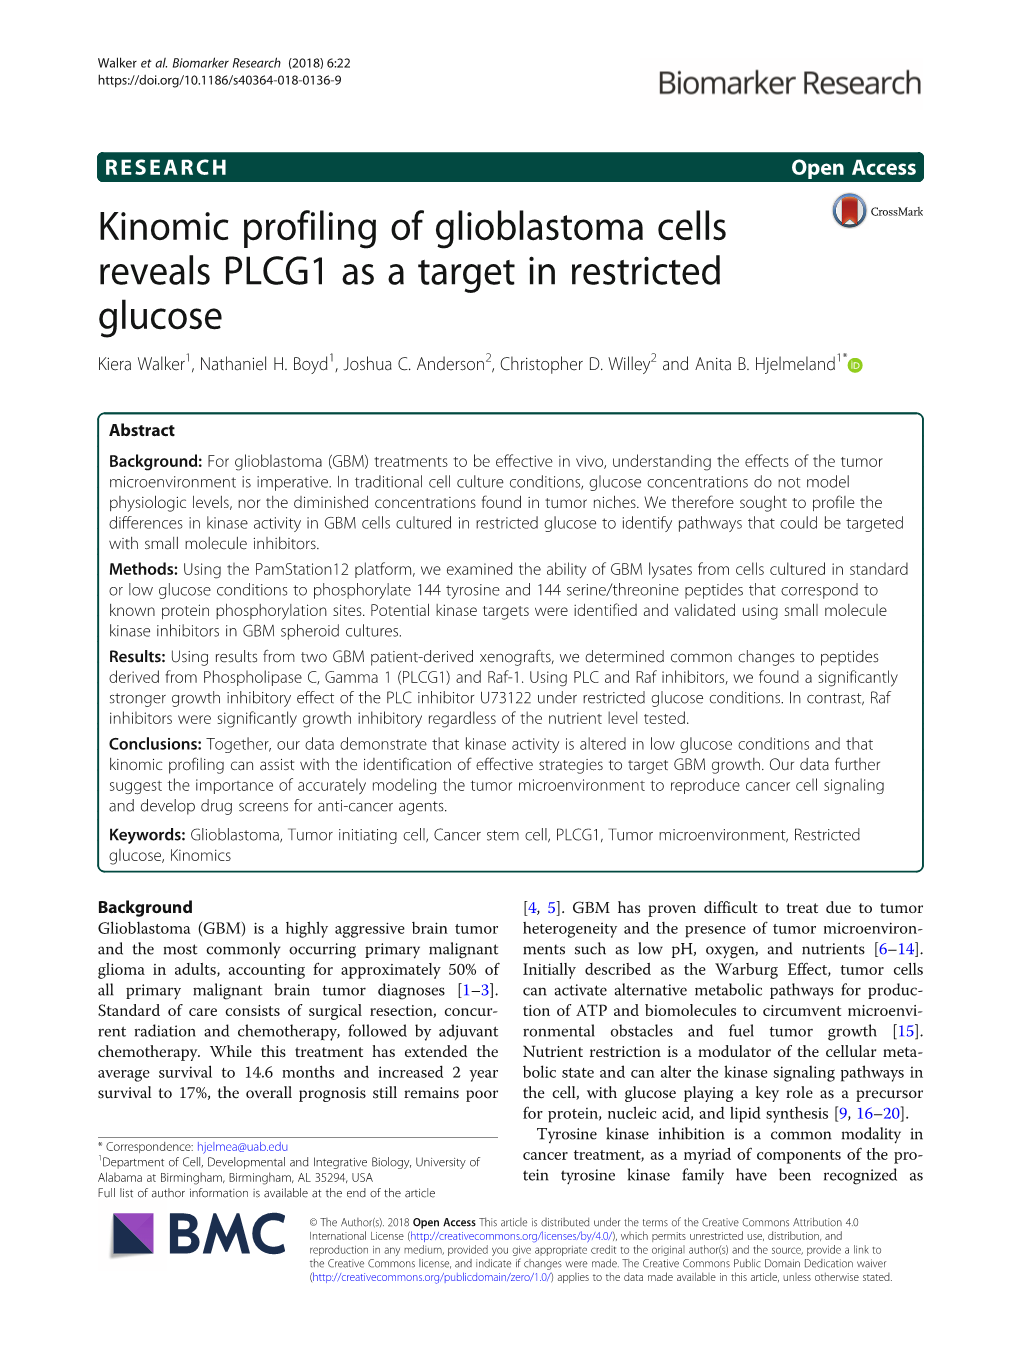 Kinomic Profiling of Glioblastoma Cells Reveals PLCG1 As a Target in Restricted Glucose Kiera Walker1, Nathaniel H